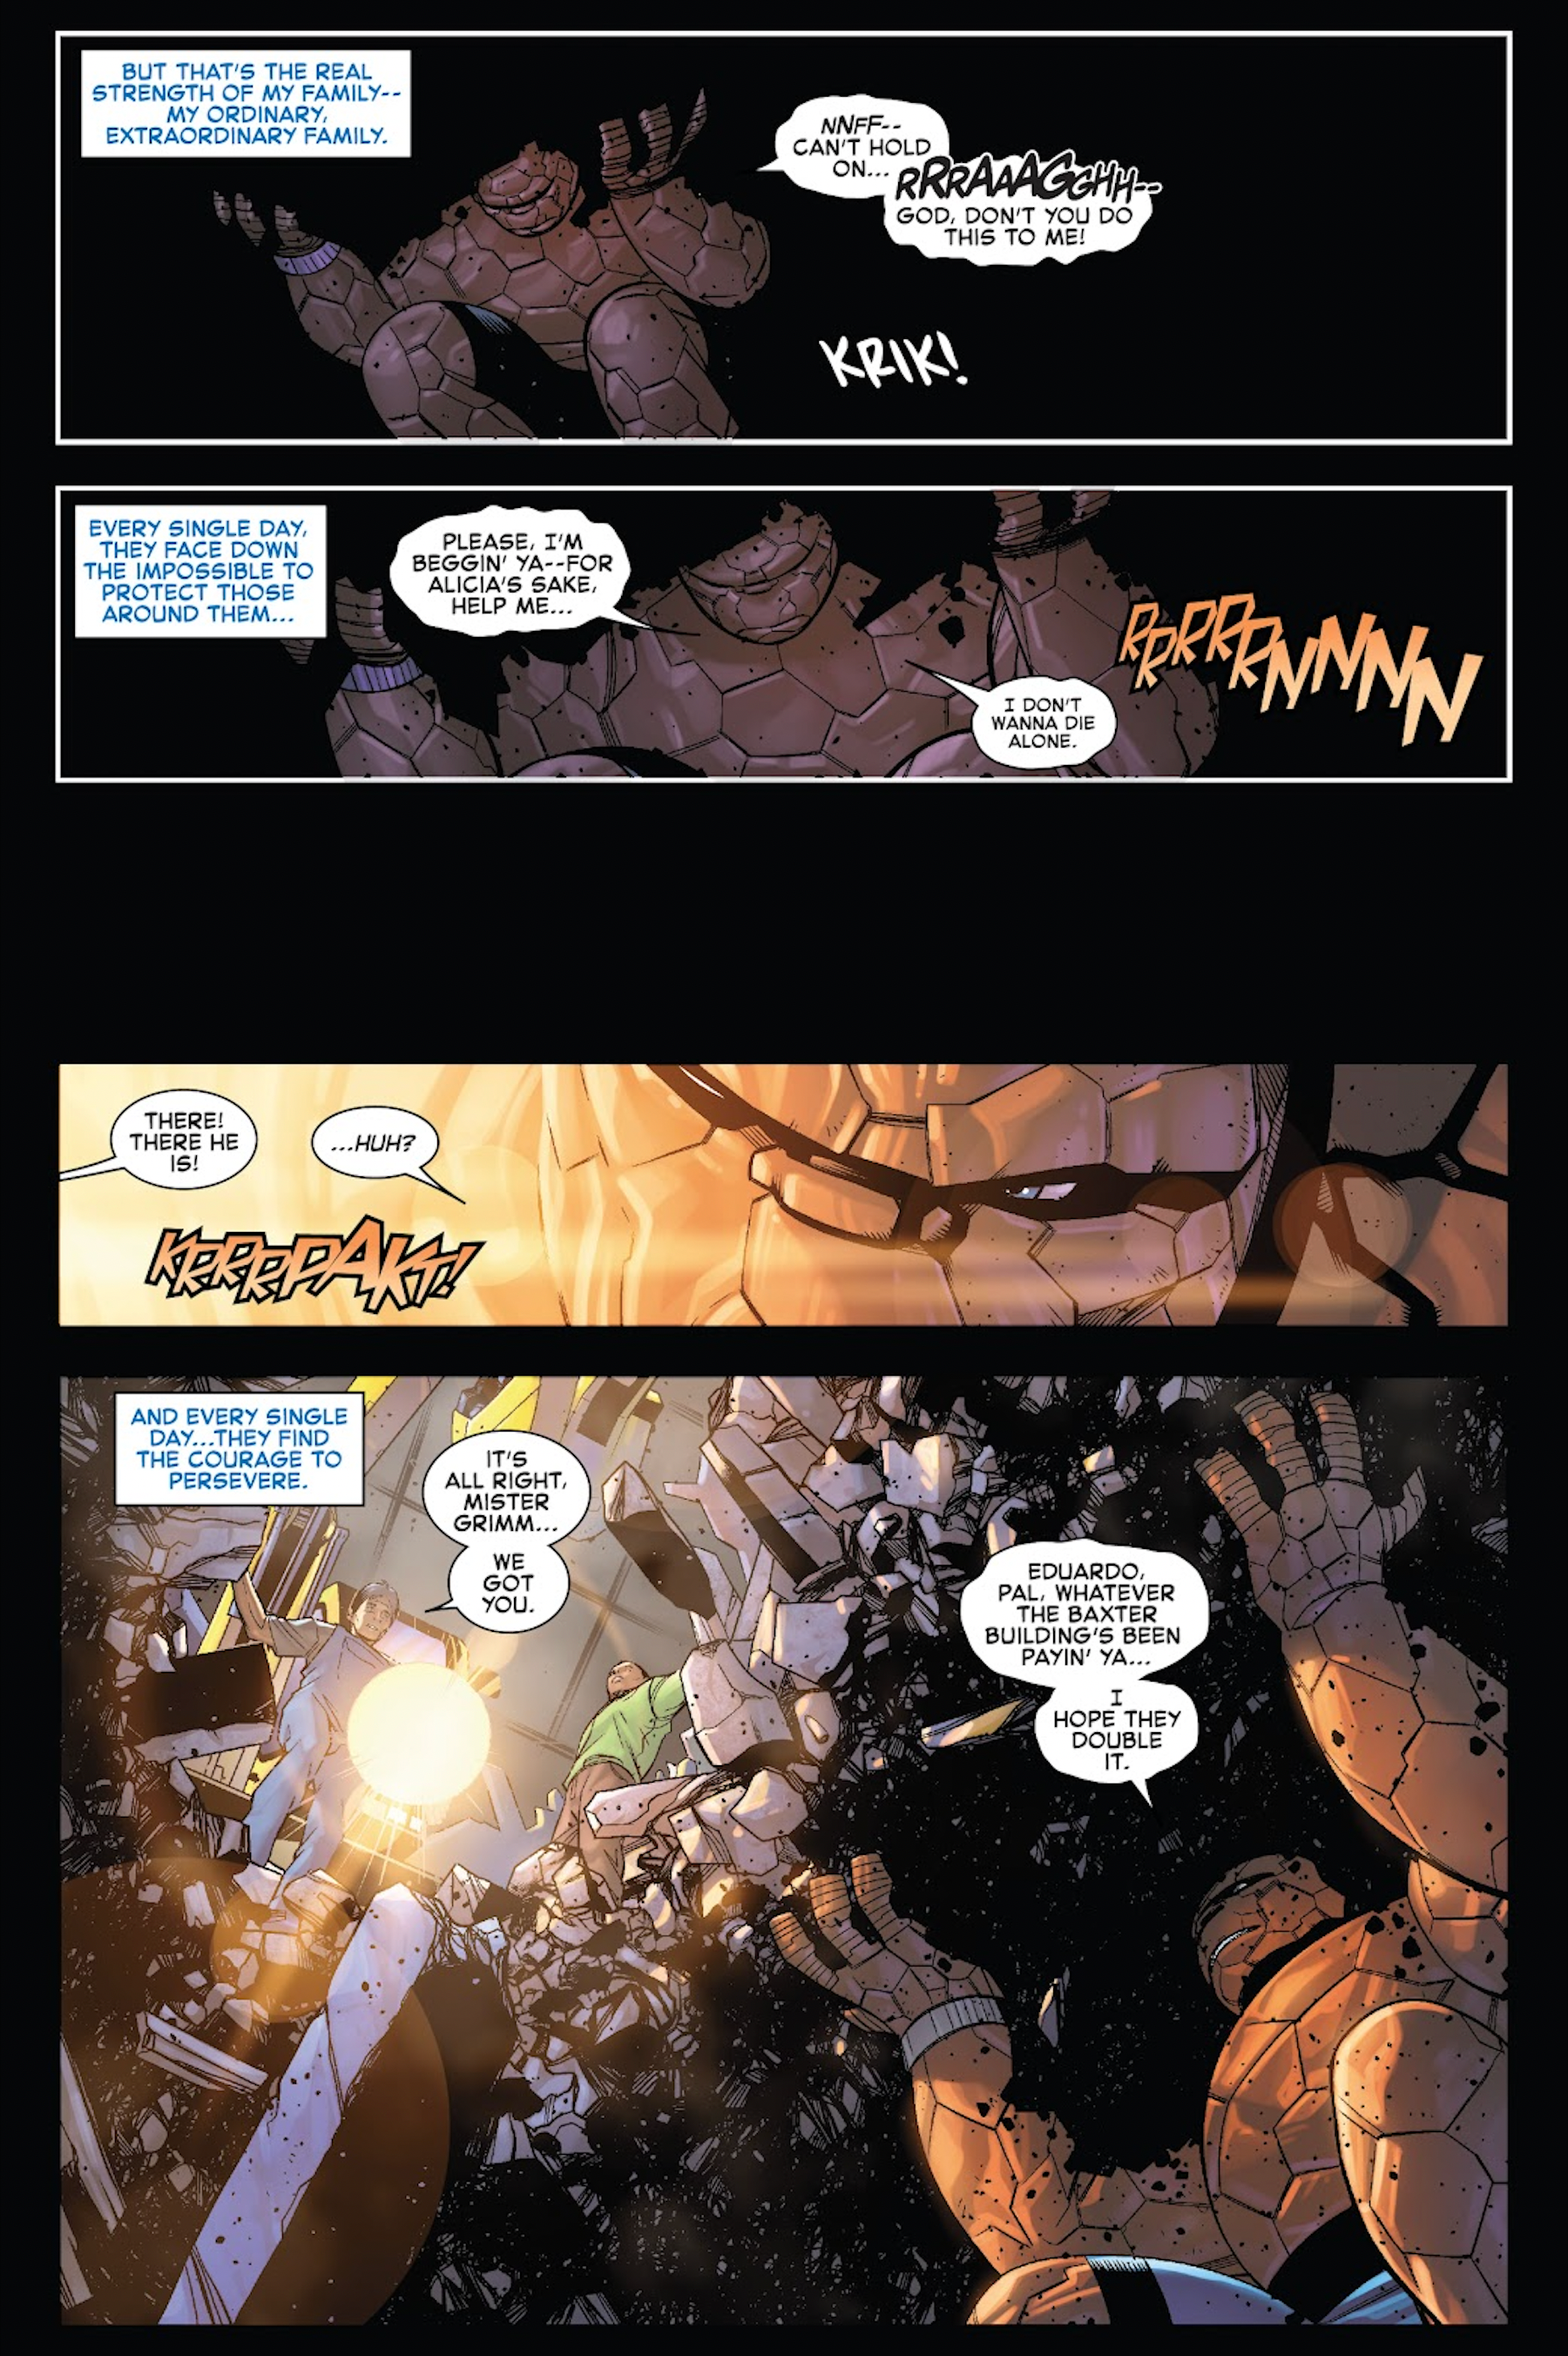 Why The Fantastic Four Aren’t Popular Anymore